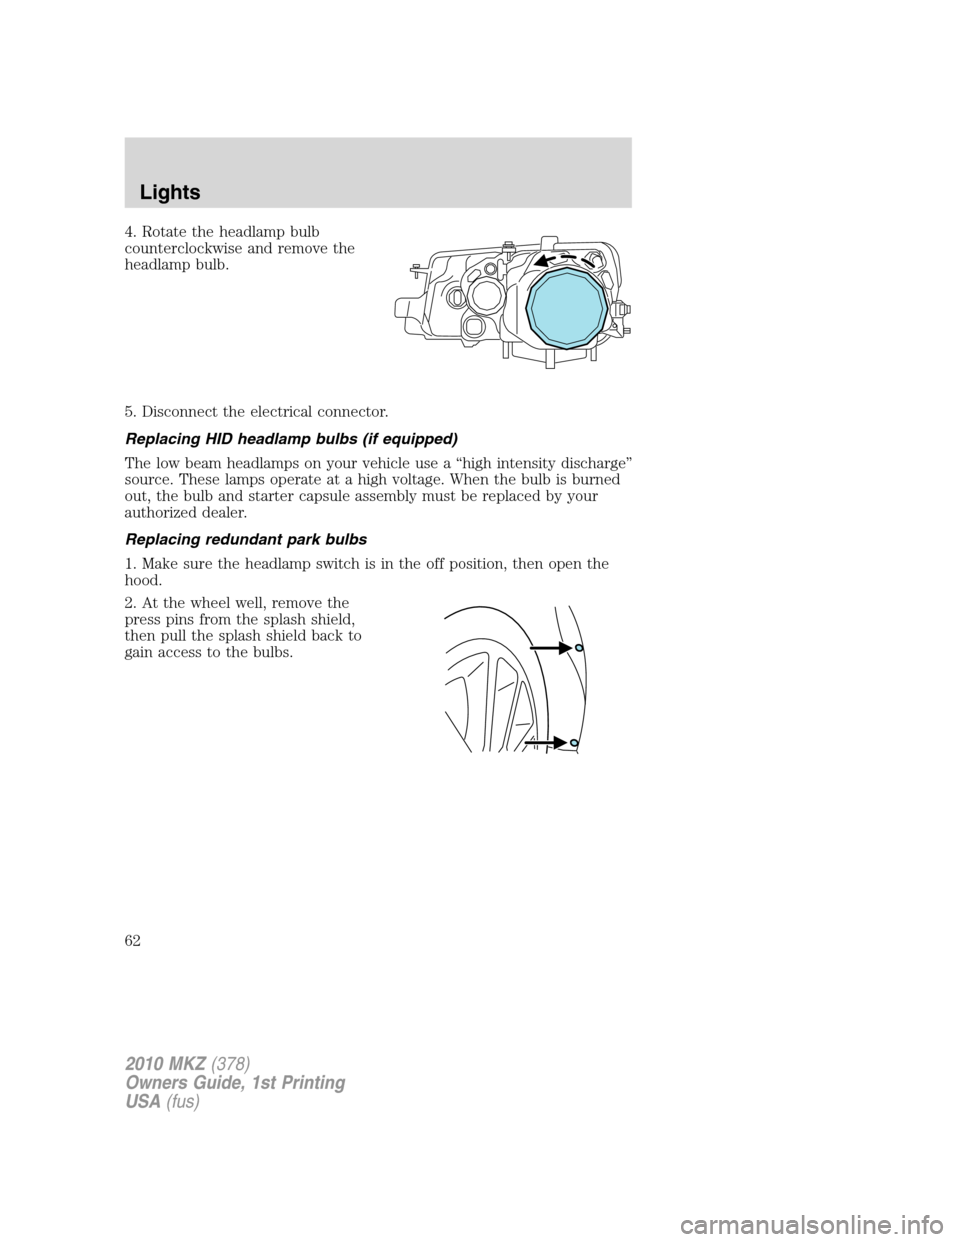 LINCOLN MKZ 2010  Owners Manual 4. Rotate the headlamp bulb
counterclockwise and remove the
headlamp bulb.
5. Disconnect the electrical connector.
Replacing HID headlamp bulbs (if equipped)
The low beam headlamps on your vehicle use